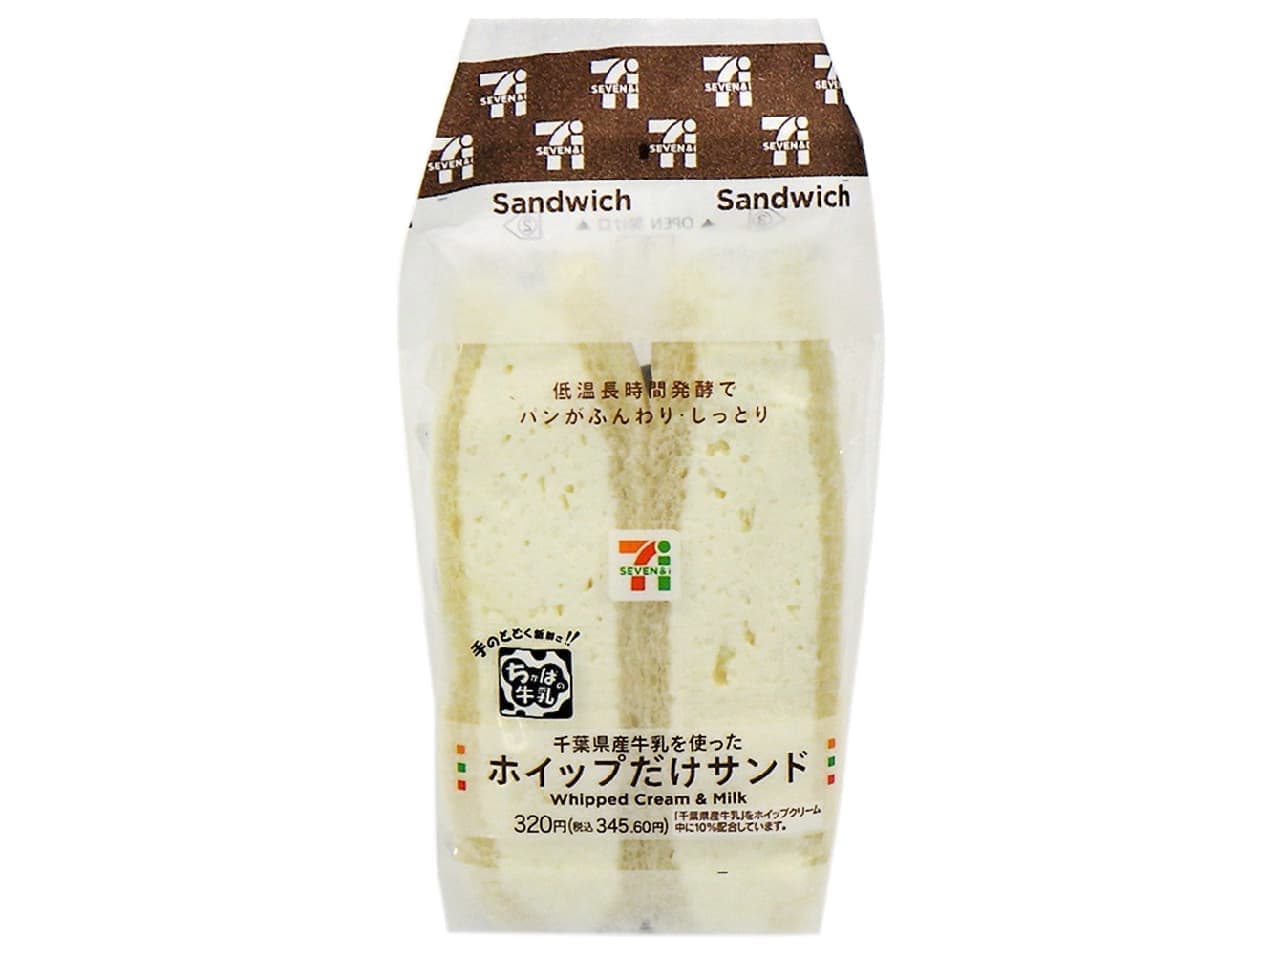 7-ELEVEN "Whipped Only Sandwich with Chiba Milk